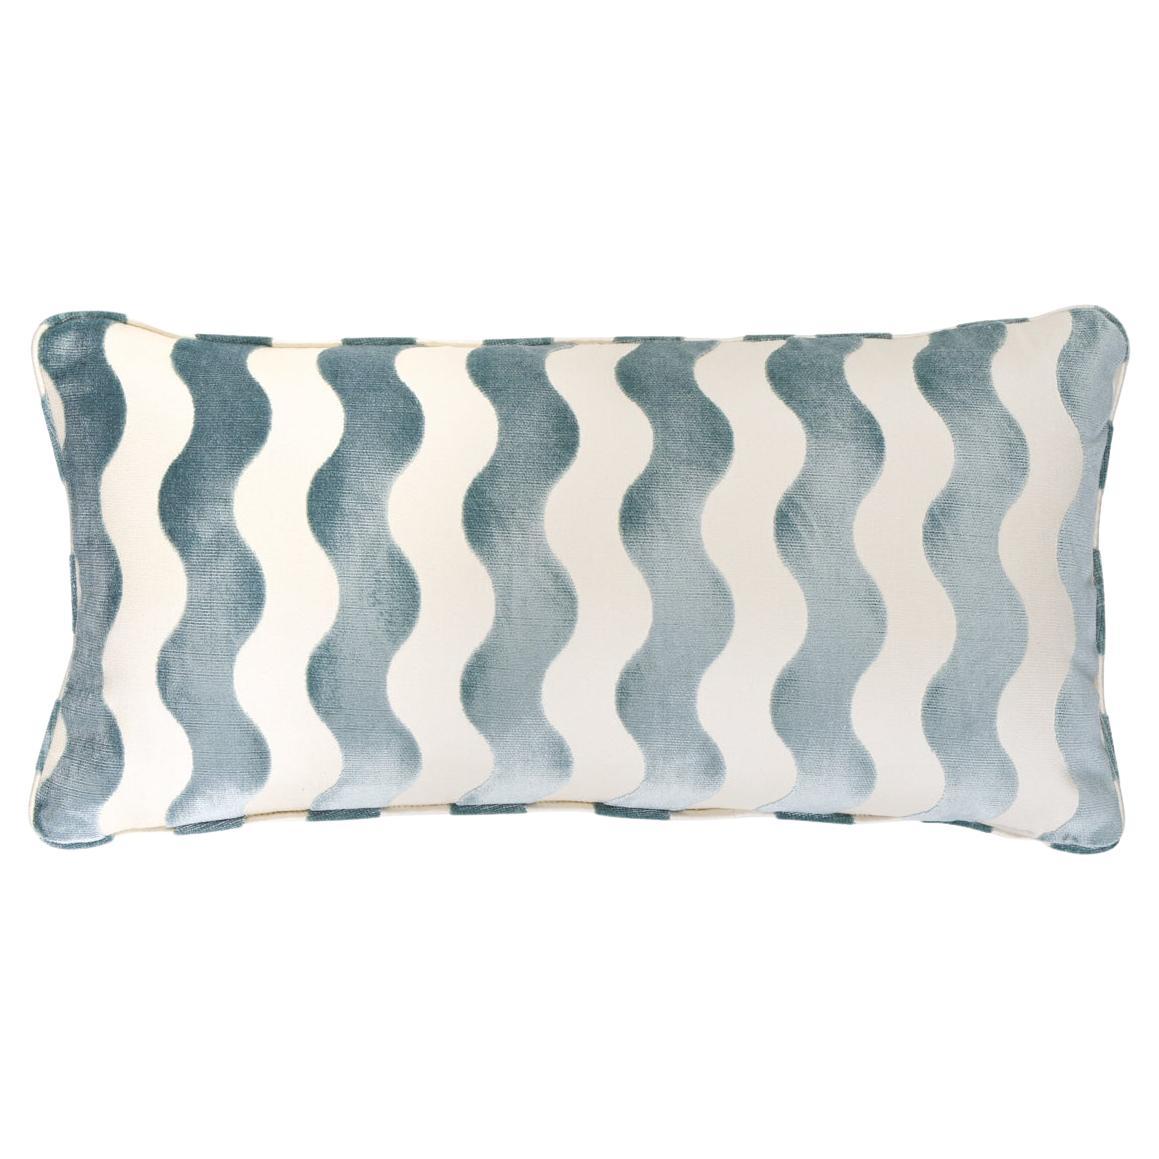 The Wave Pillow 24x12 "